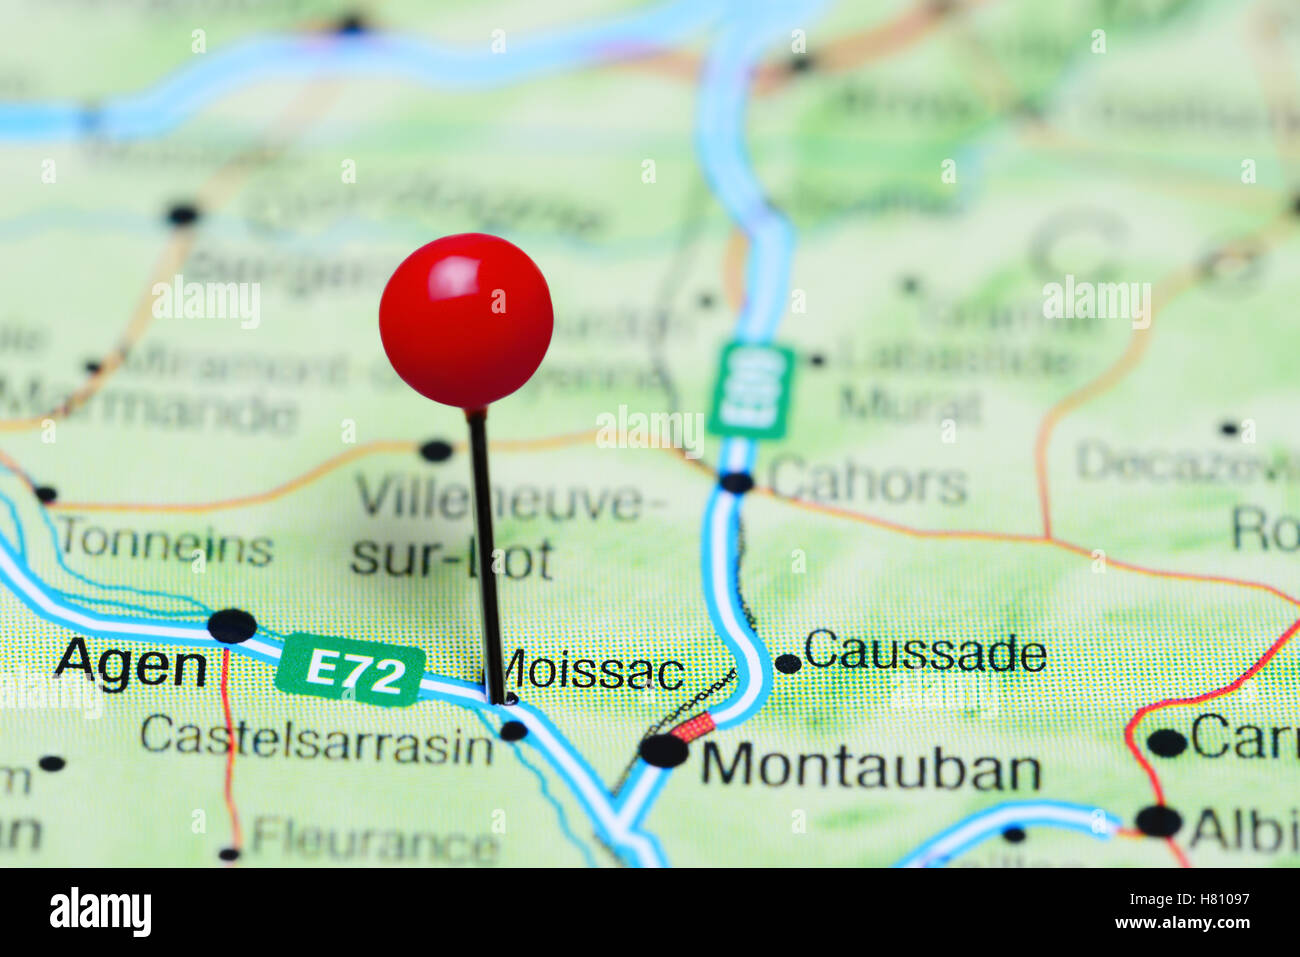 Moissac pinned on a map of France Stock Photo